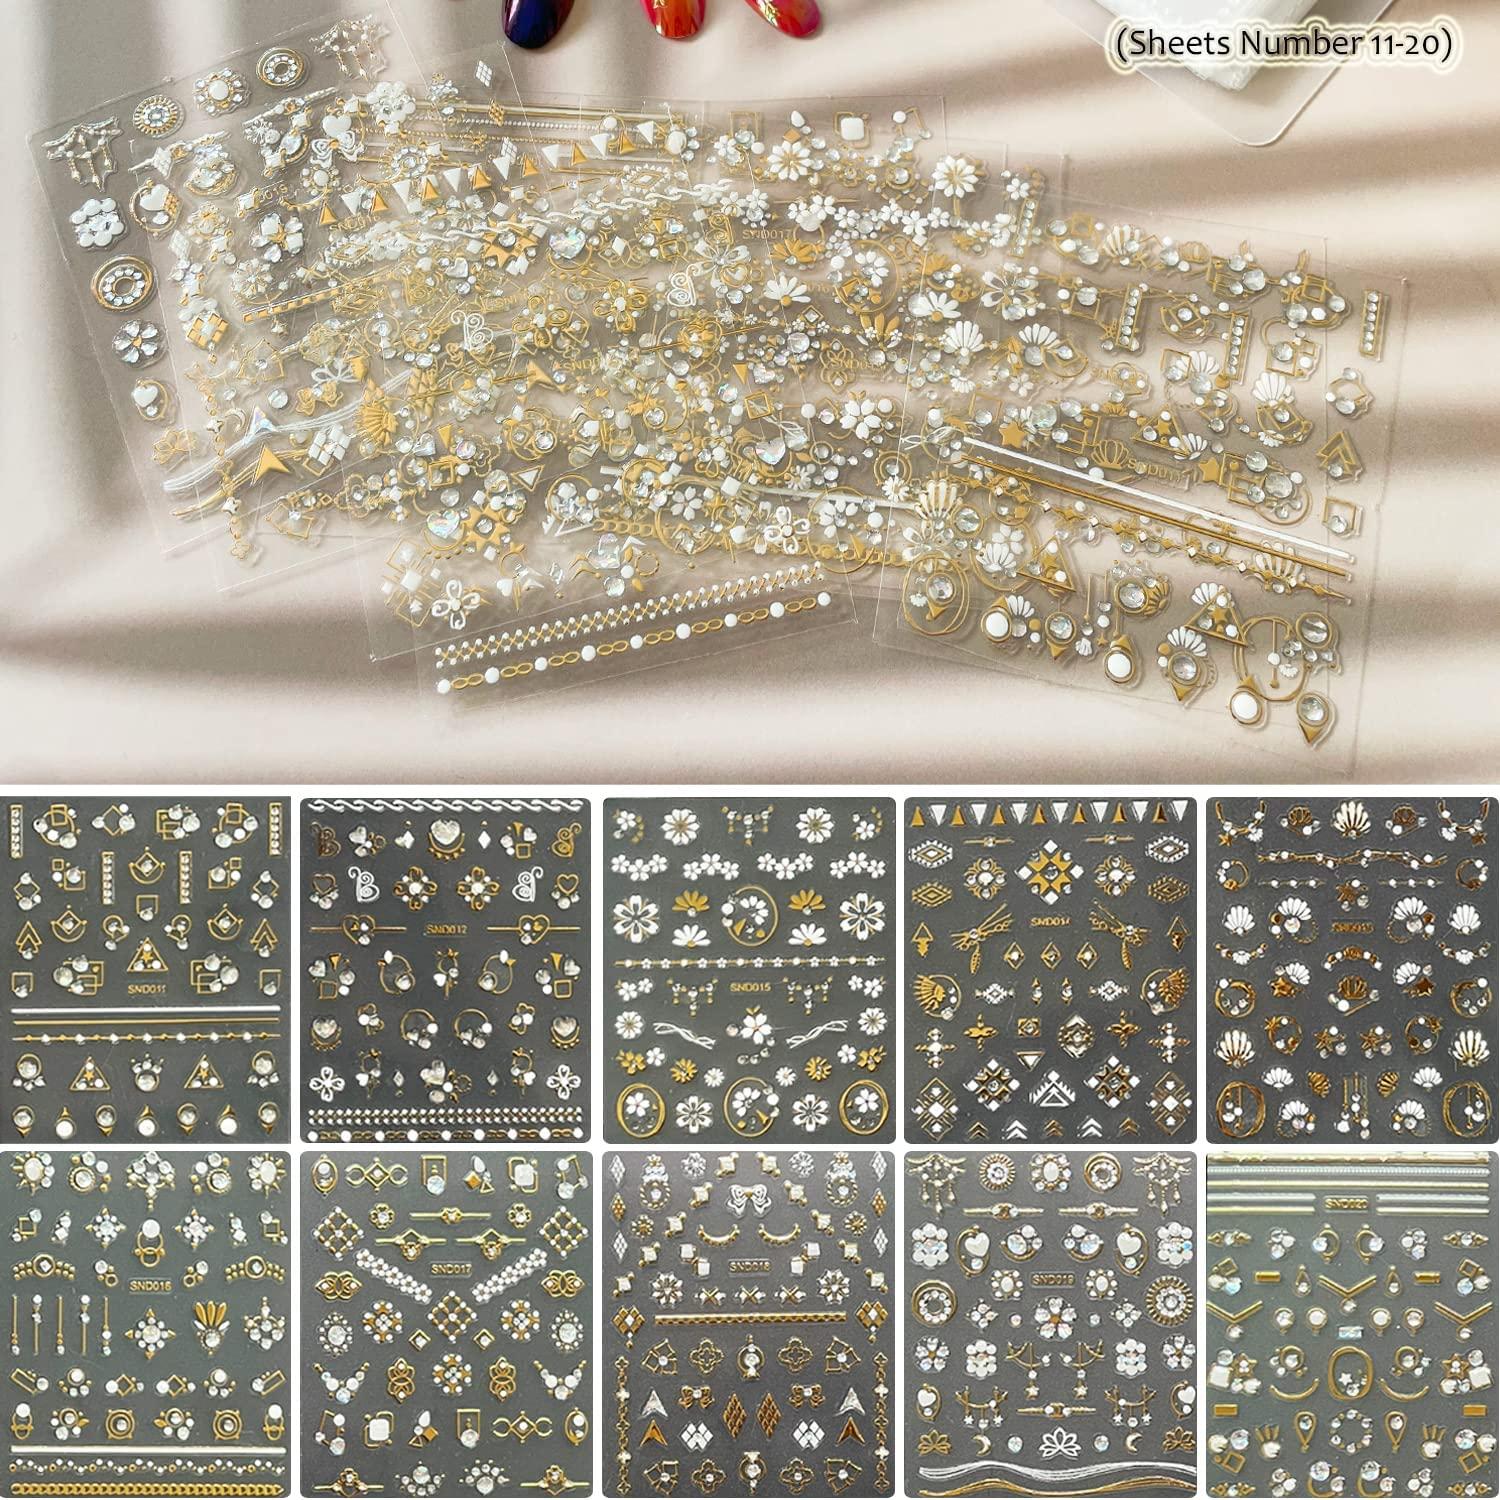 1 Lage Sheet Gold Shiny Nail Stickers Luxury Nail Salon Design Chic 3D Nail  Art Stickers Decals Self…See more 1 Lage Sheet Gold Shiny Nail Stickers